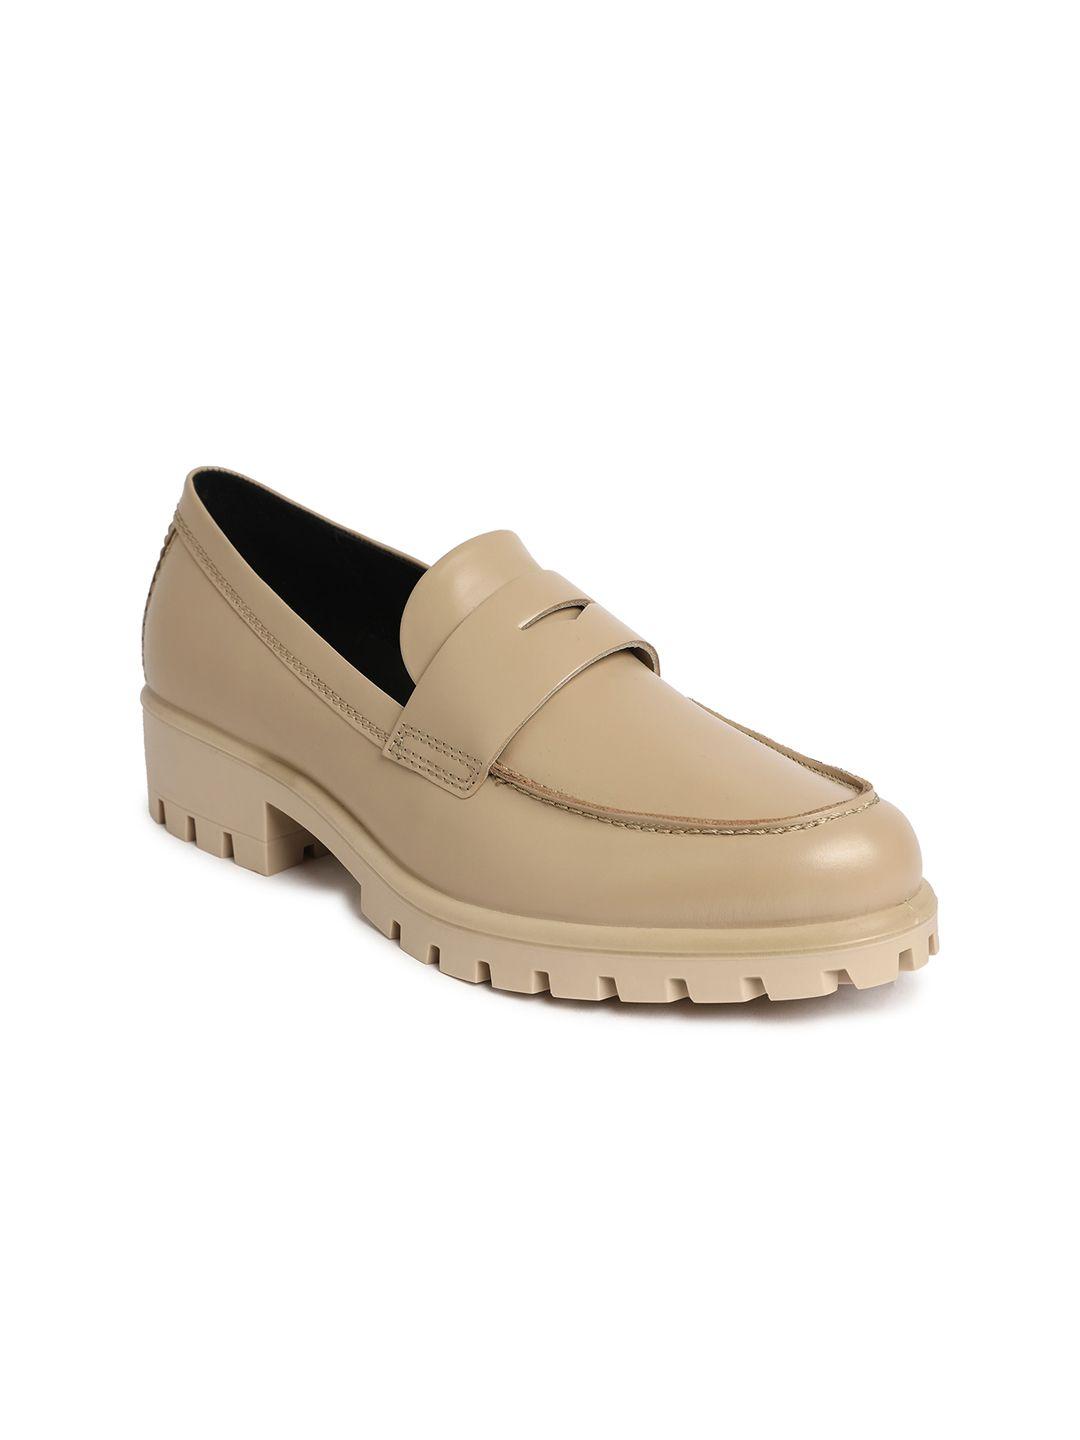 ecco women modtray leather comfort insole penny loafers